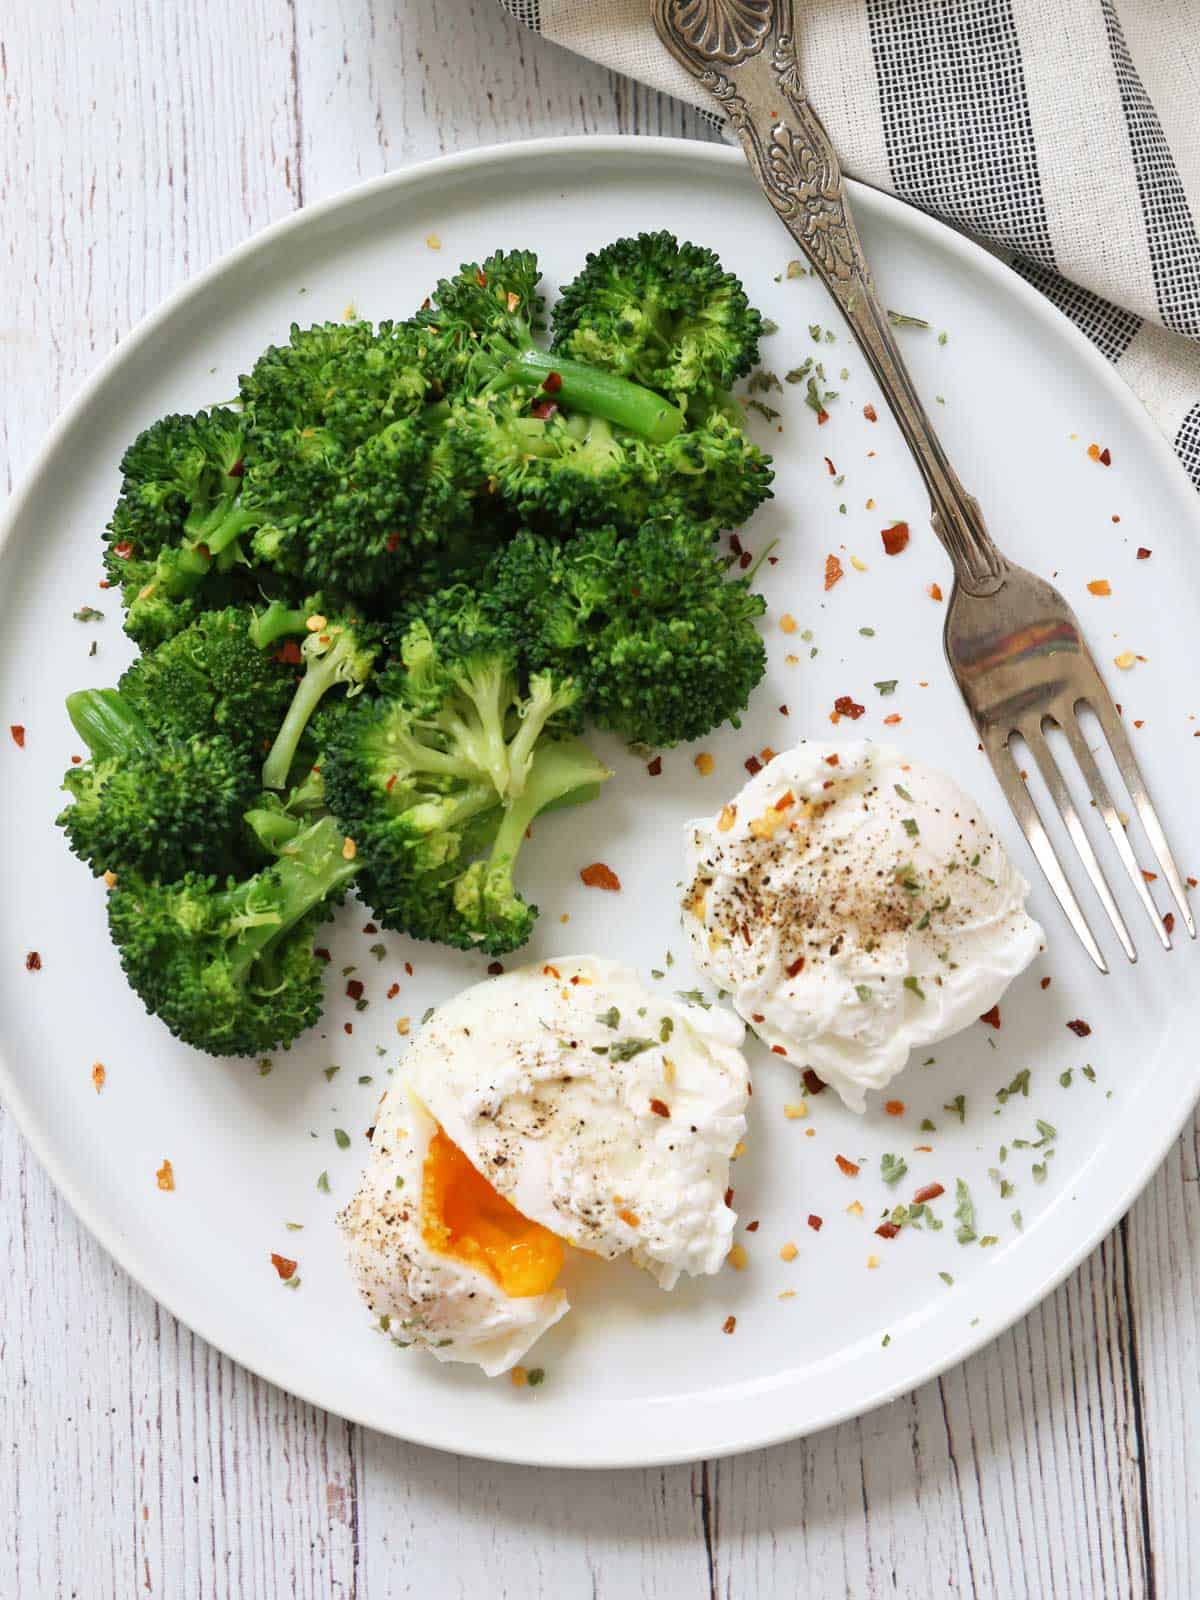 Two poached eggs are served with broccoli.